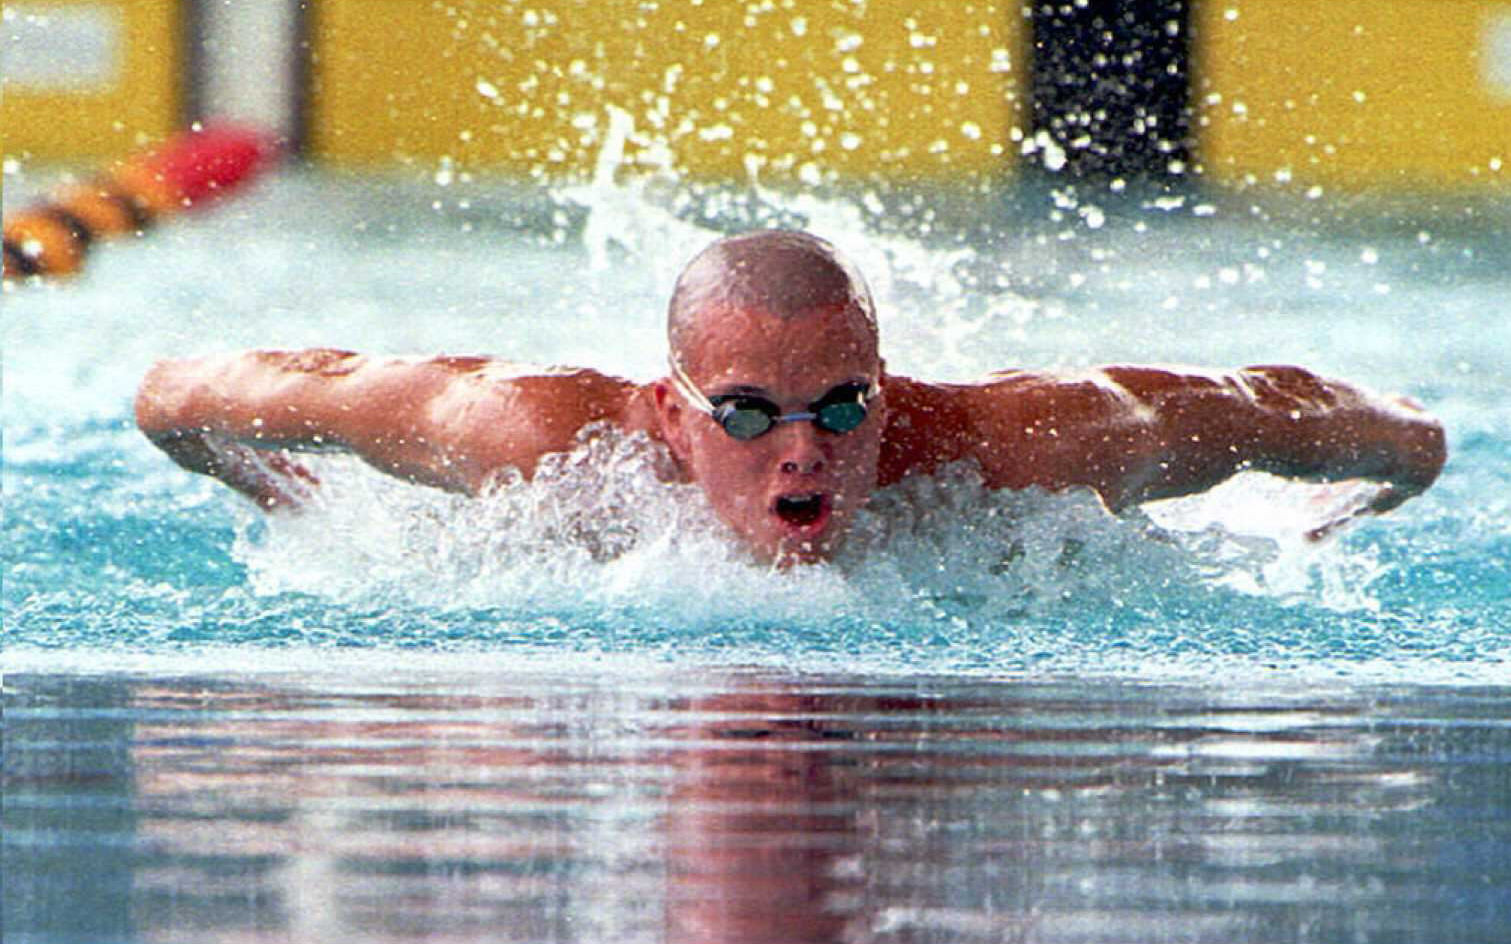 Scott Miller won two Olympic and three Commonwealth Games medals during his swimming career ©Getty Images